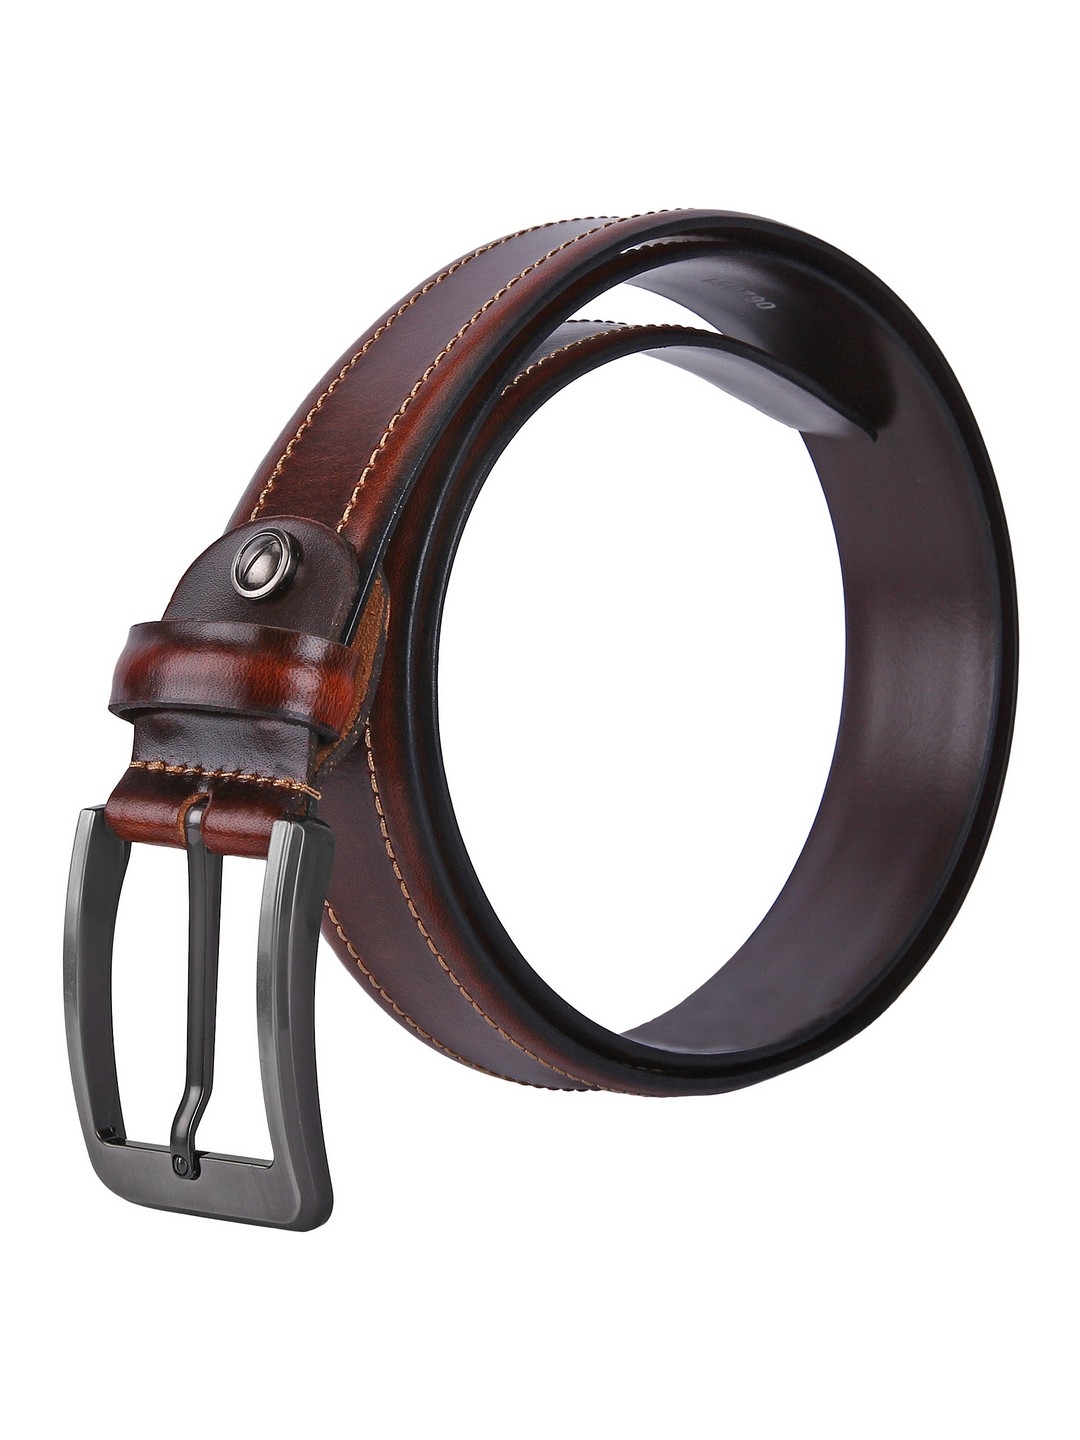 CREATURE | Creature Casual Brown Genuine Leather Belts For Men